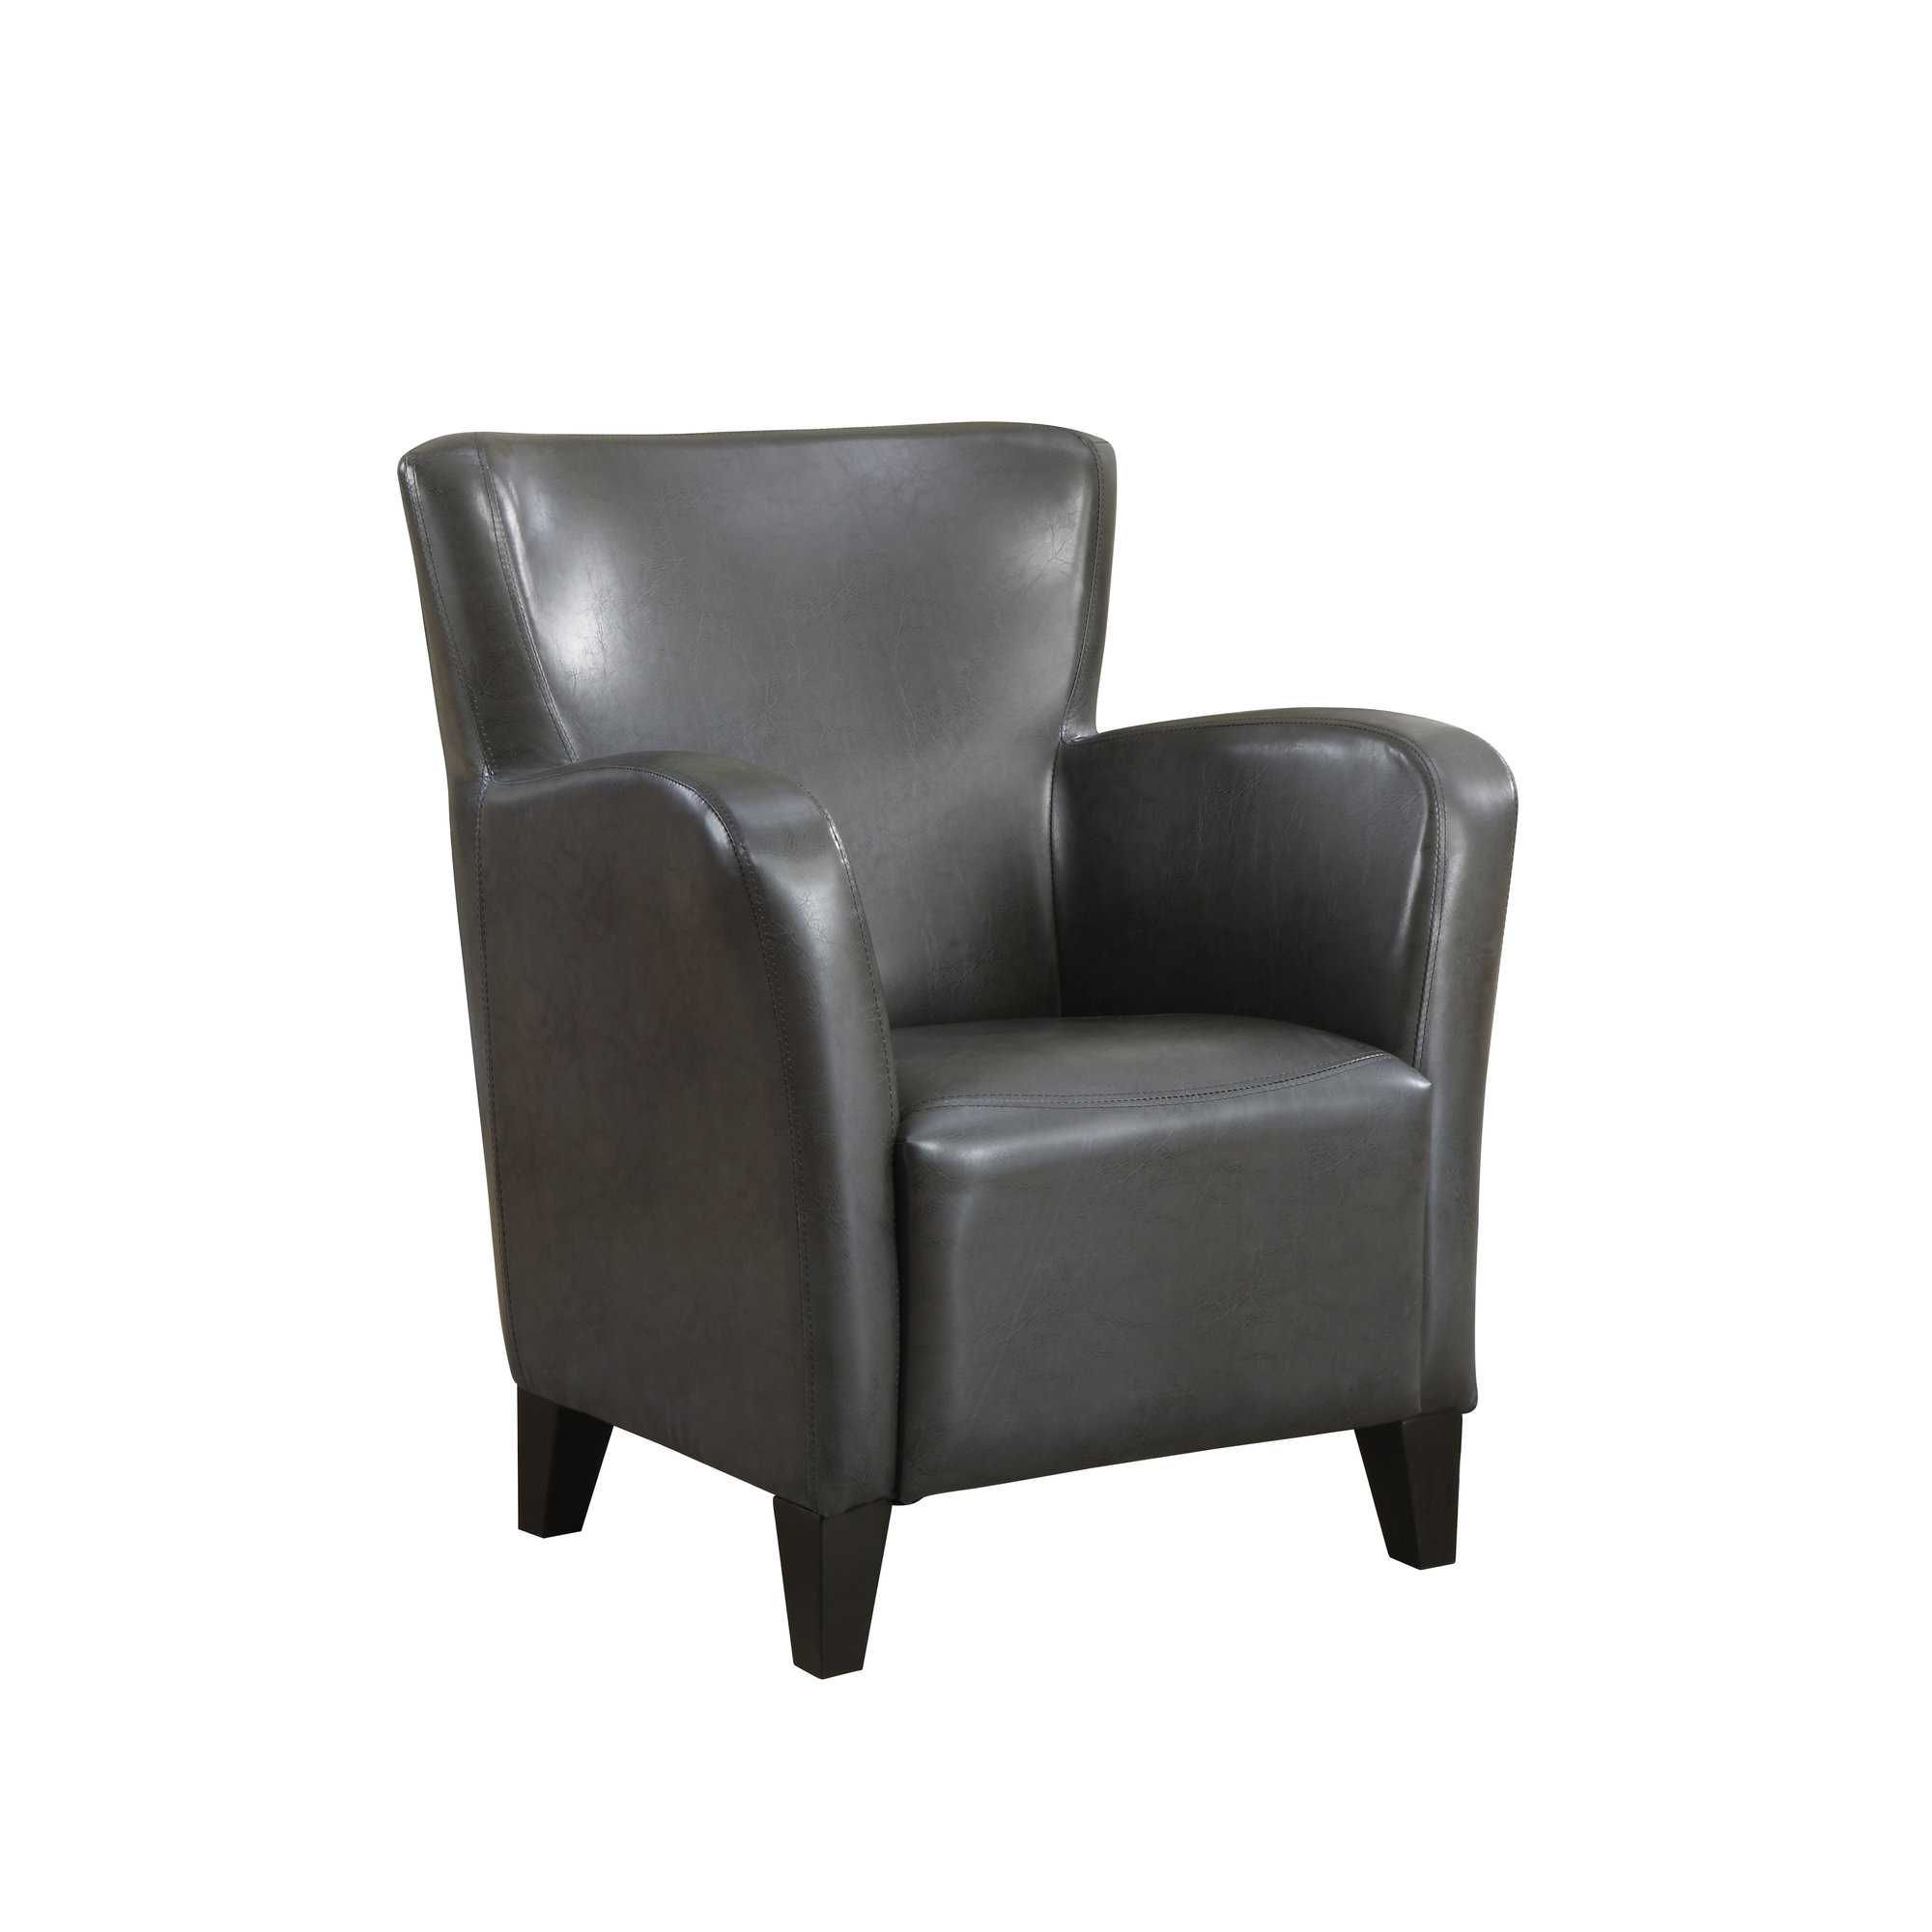 30" x 30" x 35" Grey Leather-Look Foam and Solid Wood Black Accent Chair